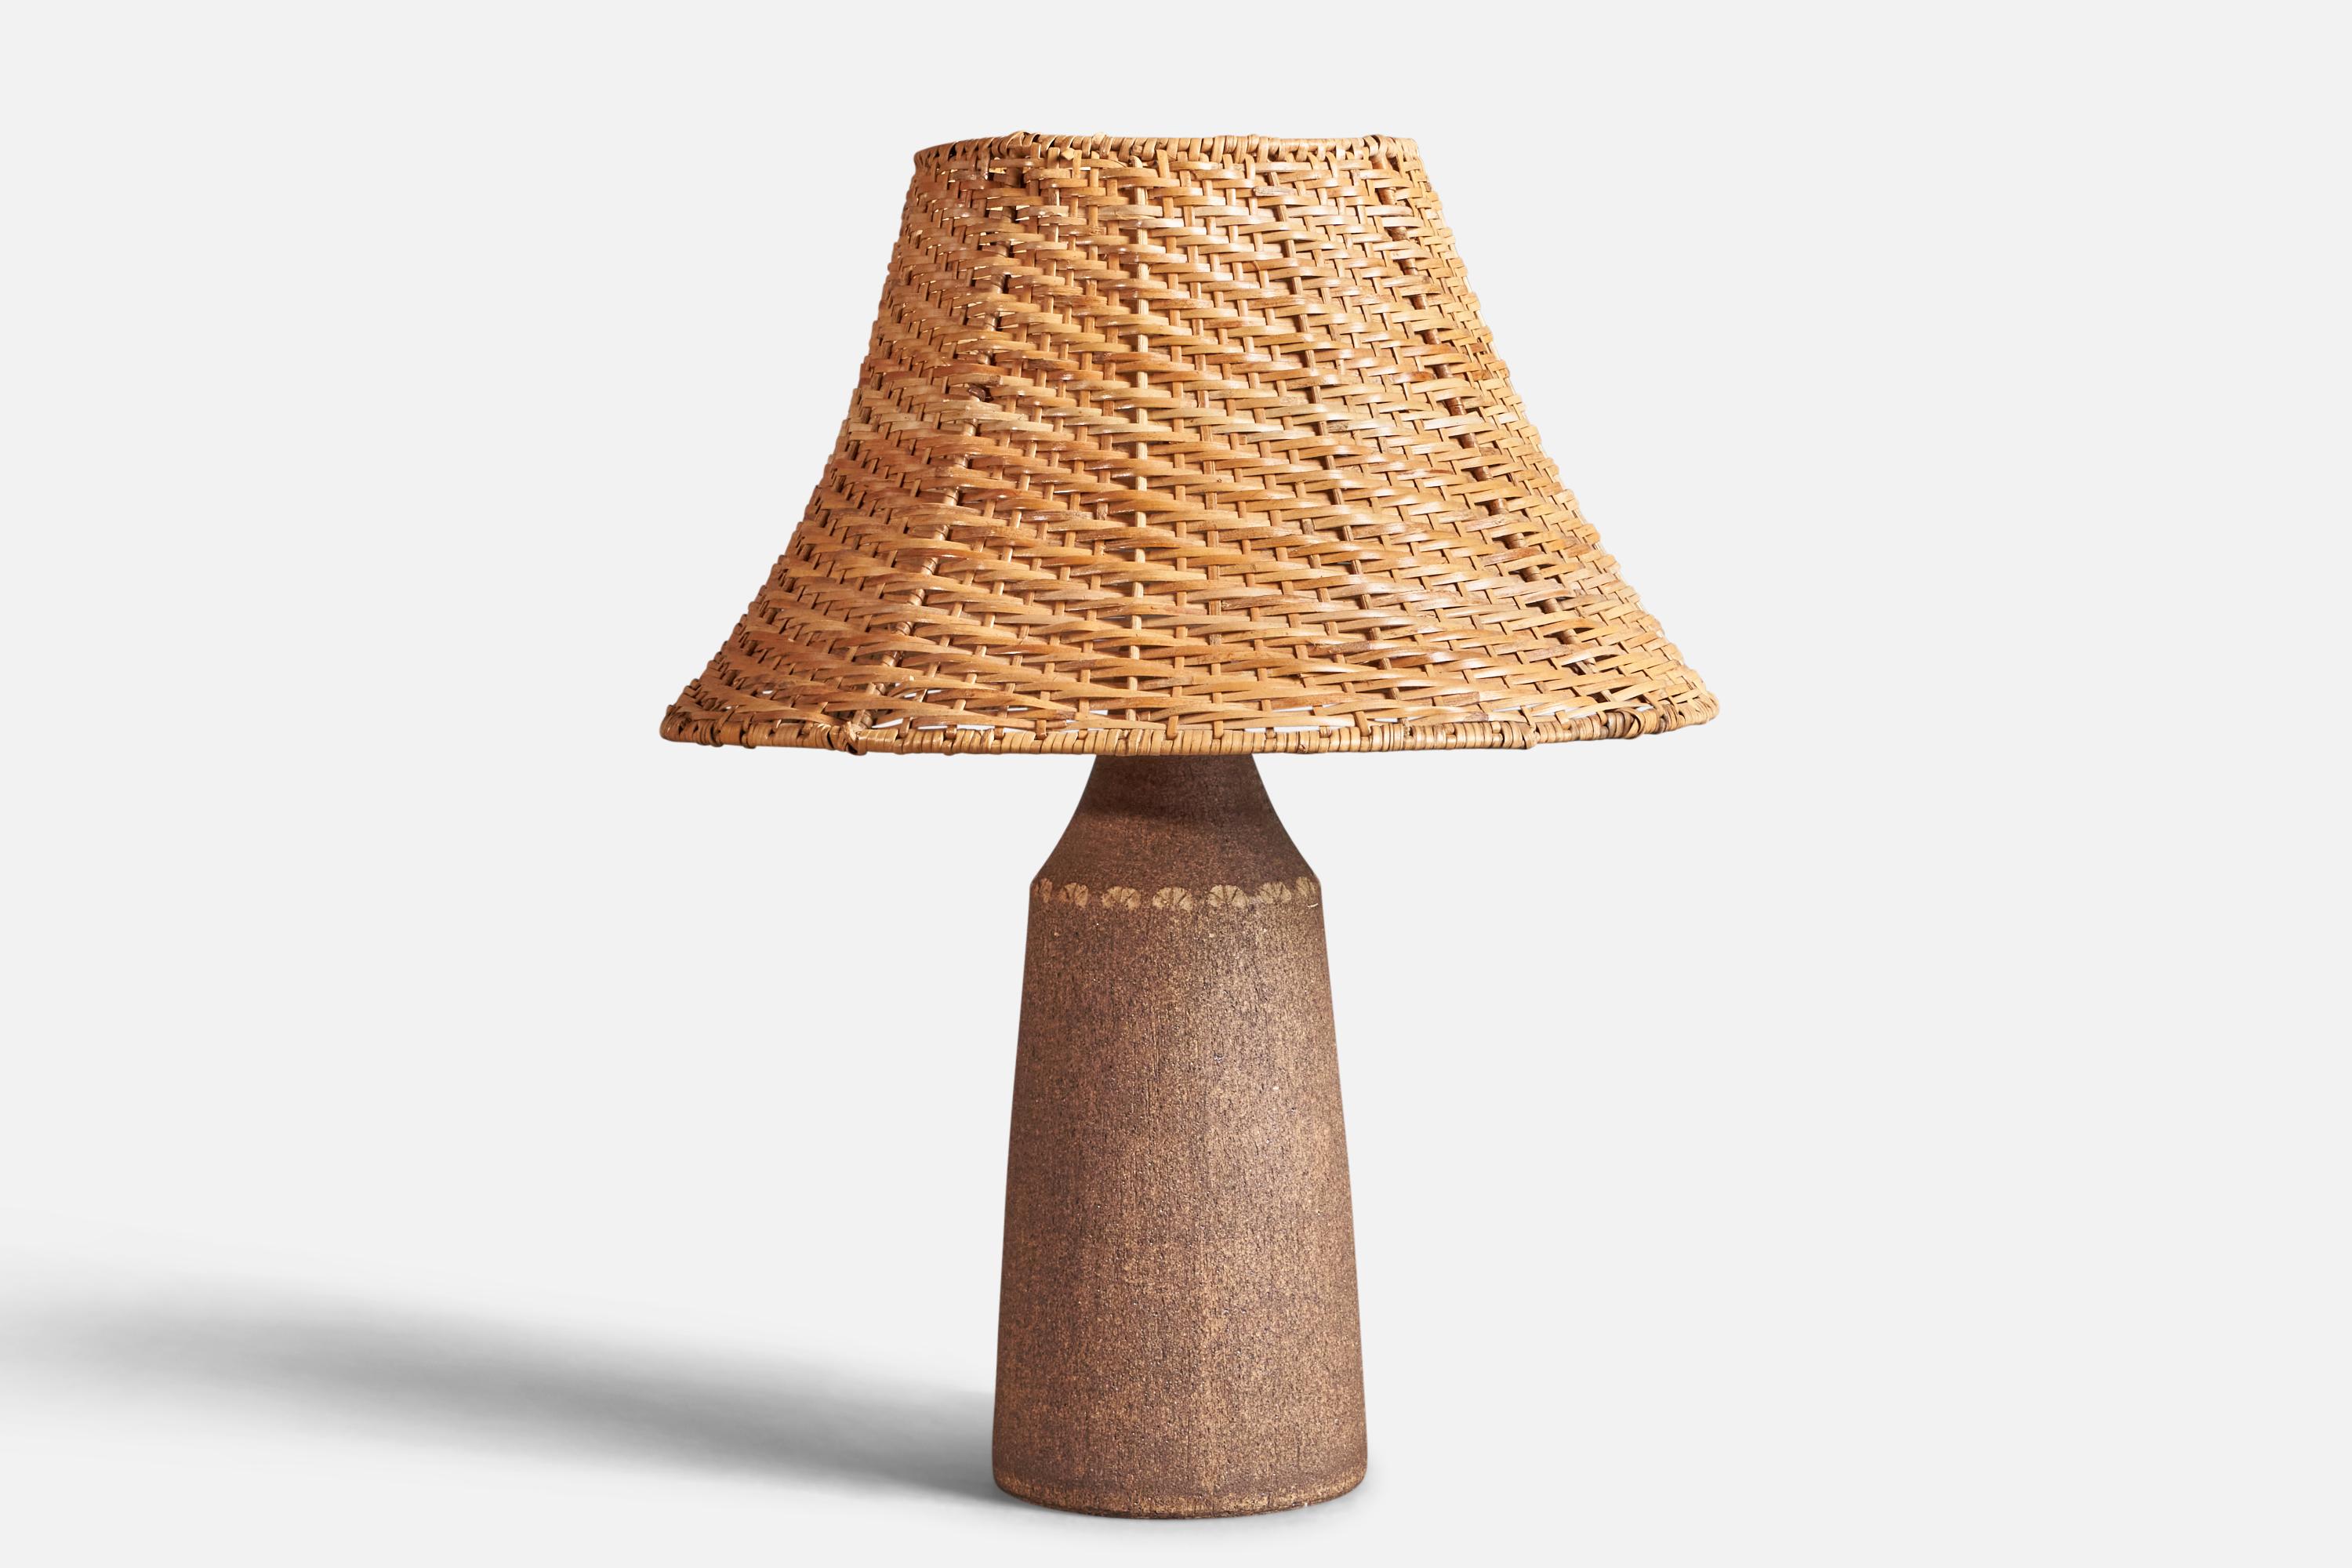 A brown stoneware and rattan table lamp, designed and produced by Nils Allan Johannesson, Barsebäck, Sweden, c. 1960s.

Sold with Lampshade.

Dimensions of Lamp (inches) : (13.75 x 5 x 5)

Dimensions of Shade (inches) : (7 x 14.2  x